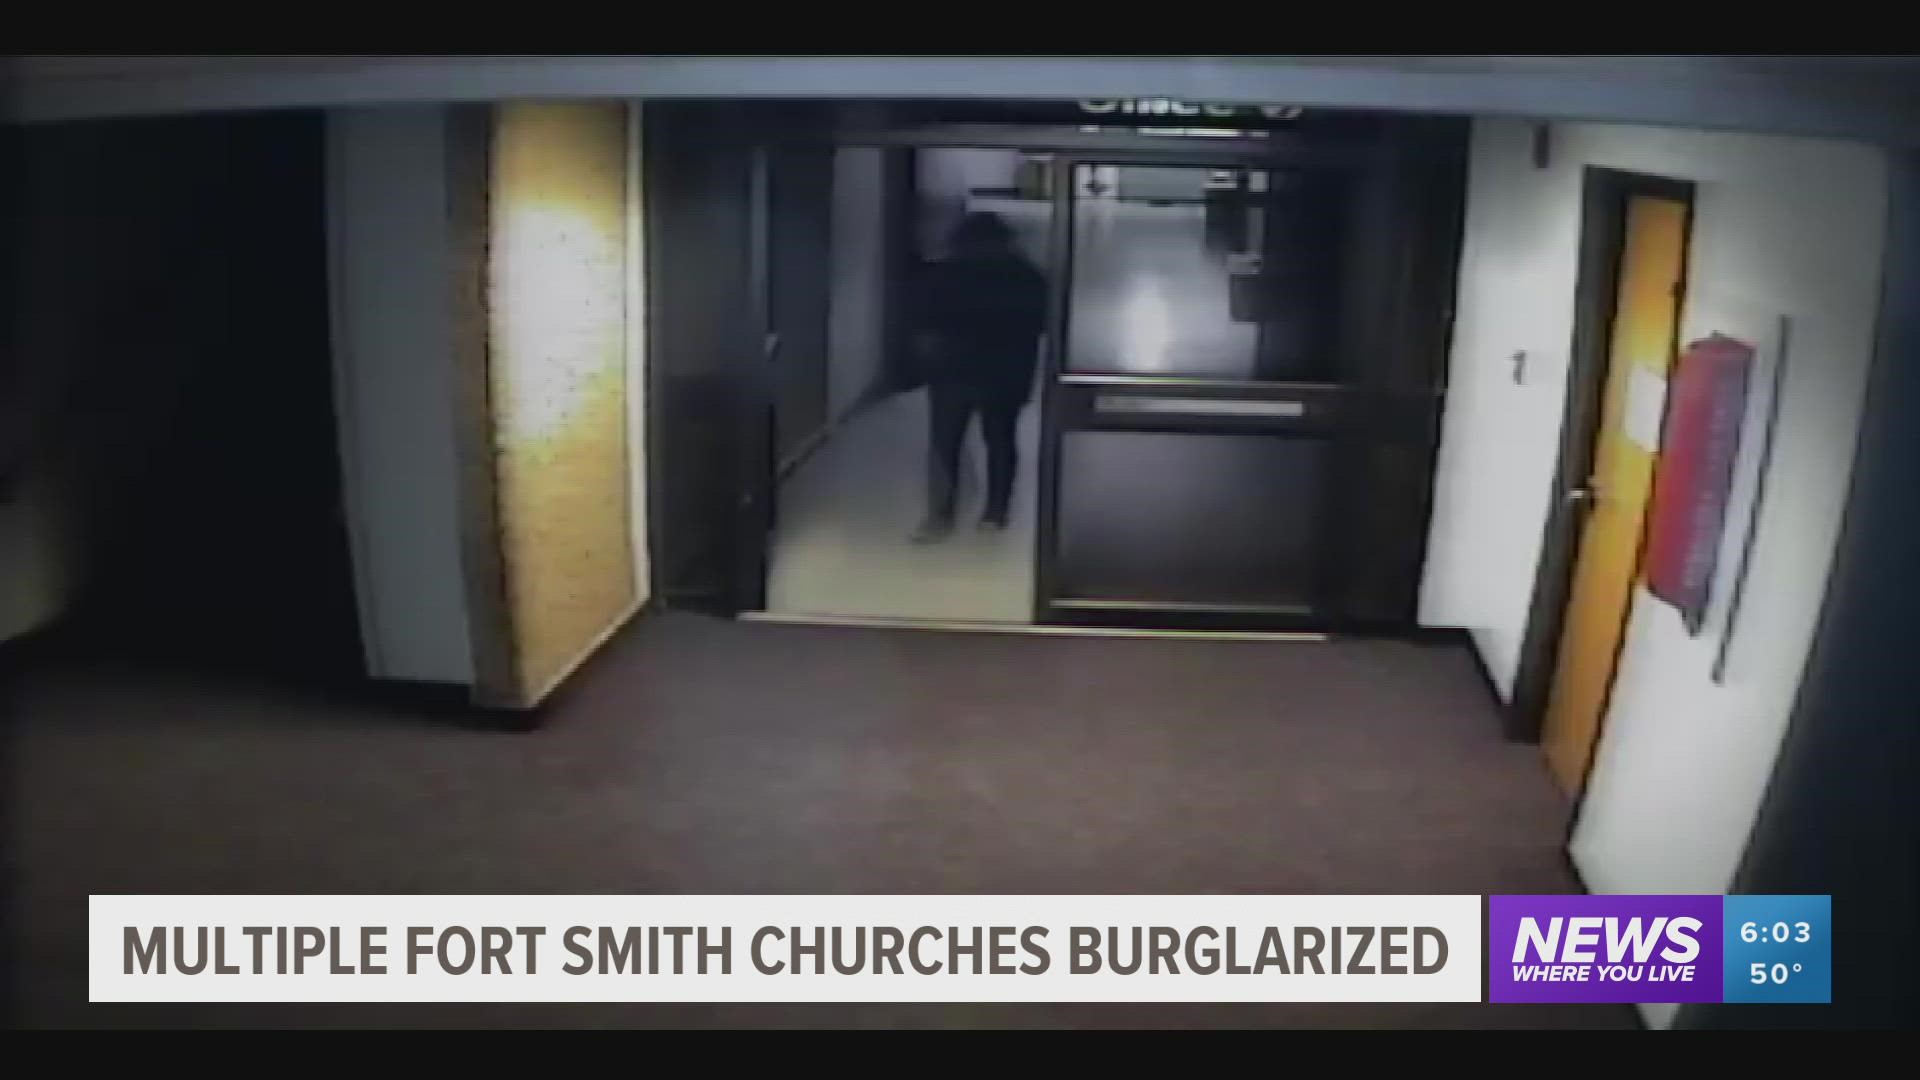 Three people were arrested in connection to several church burglaries around the Fort Smith area.